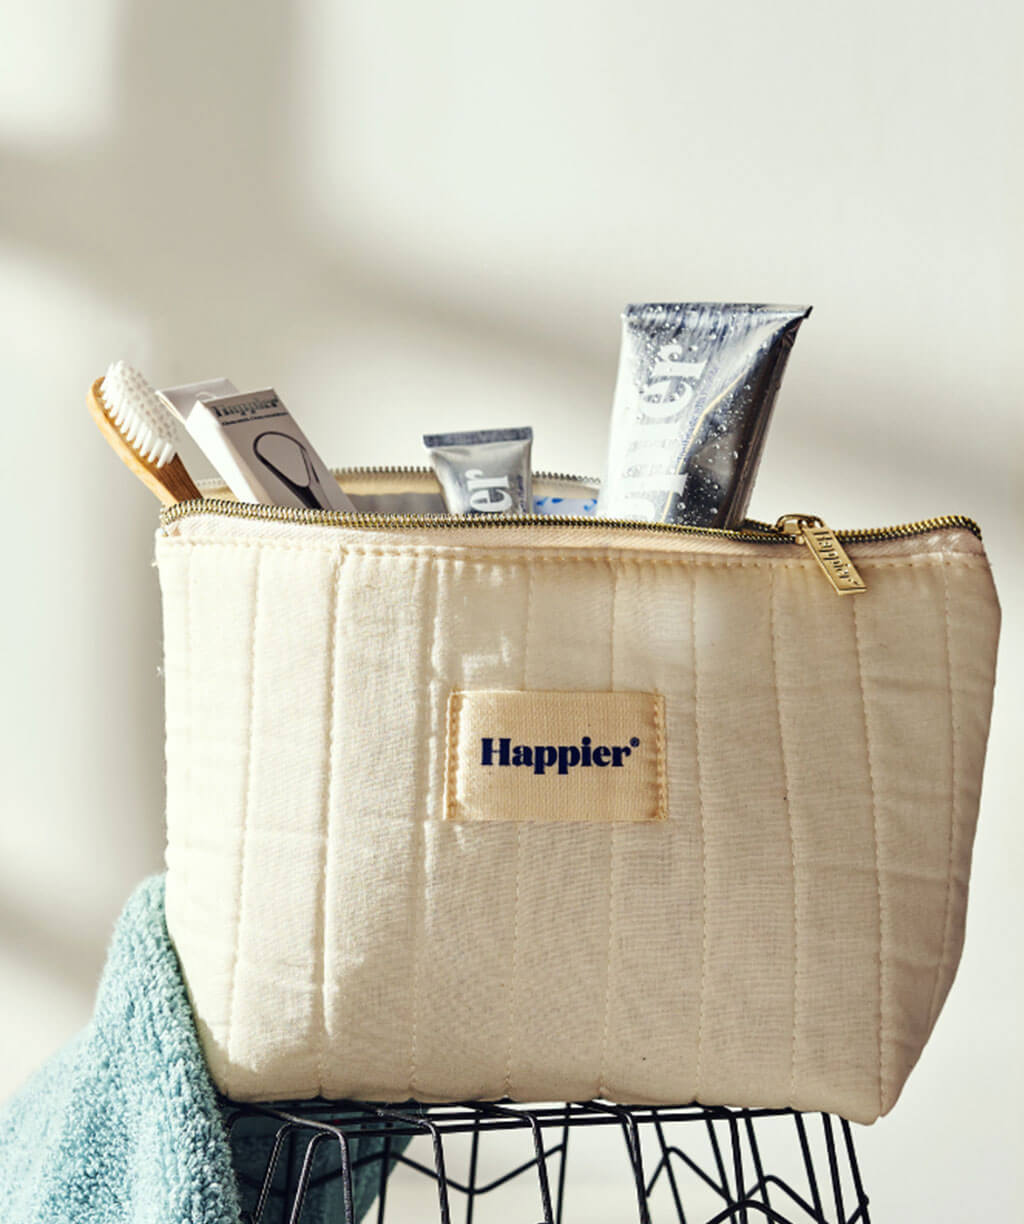 A vibrant washbag filled with other oral essential products, perfect for a joyful and refreshing travel experience.